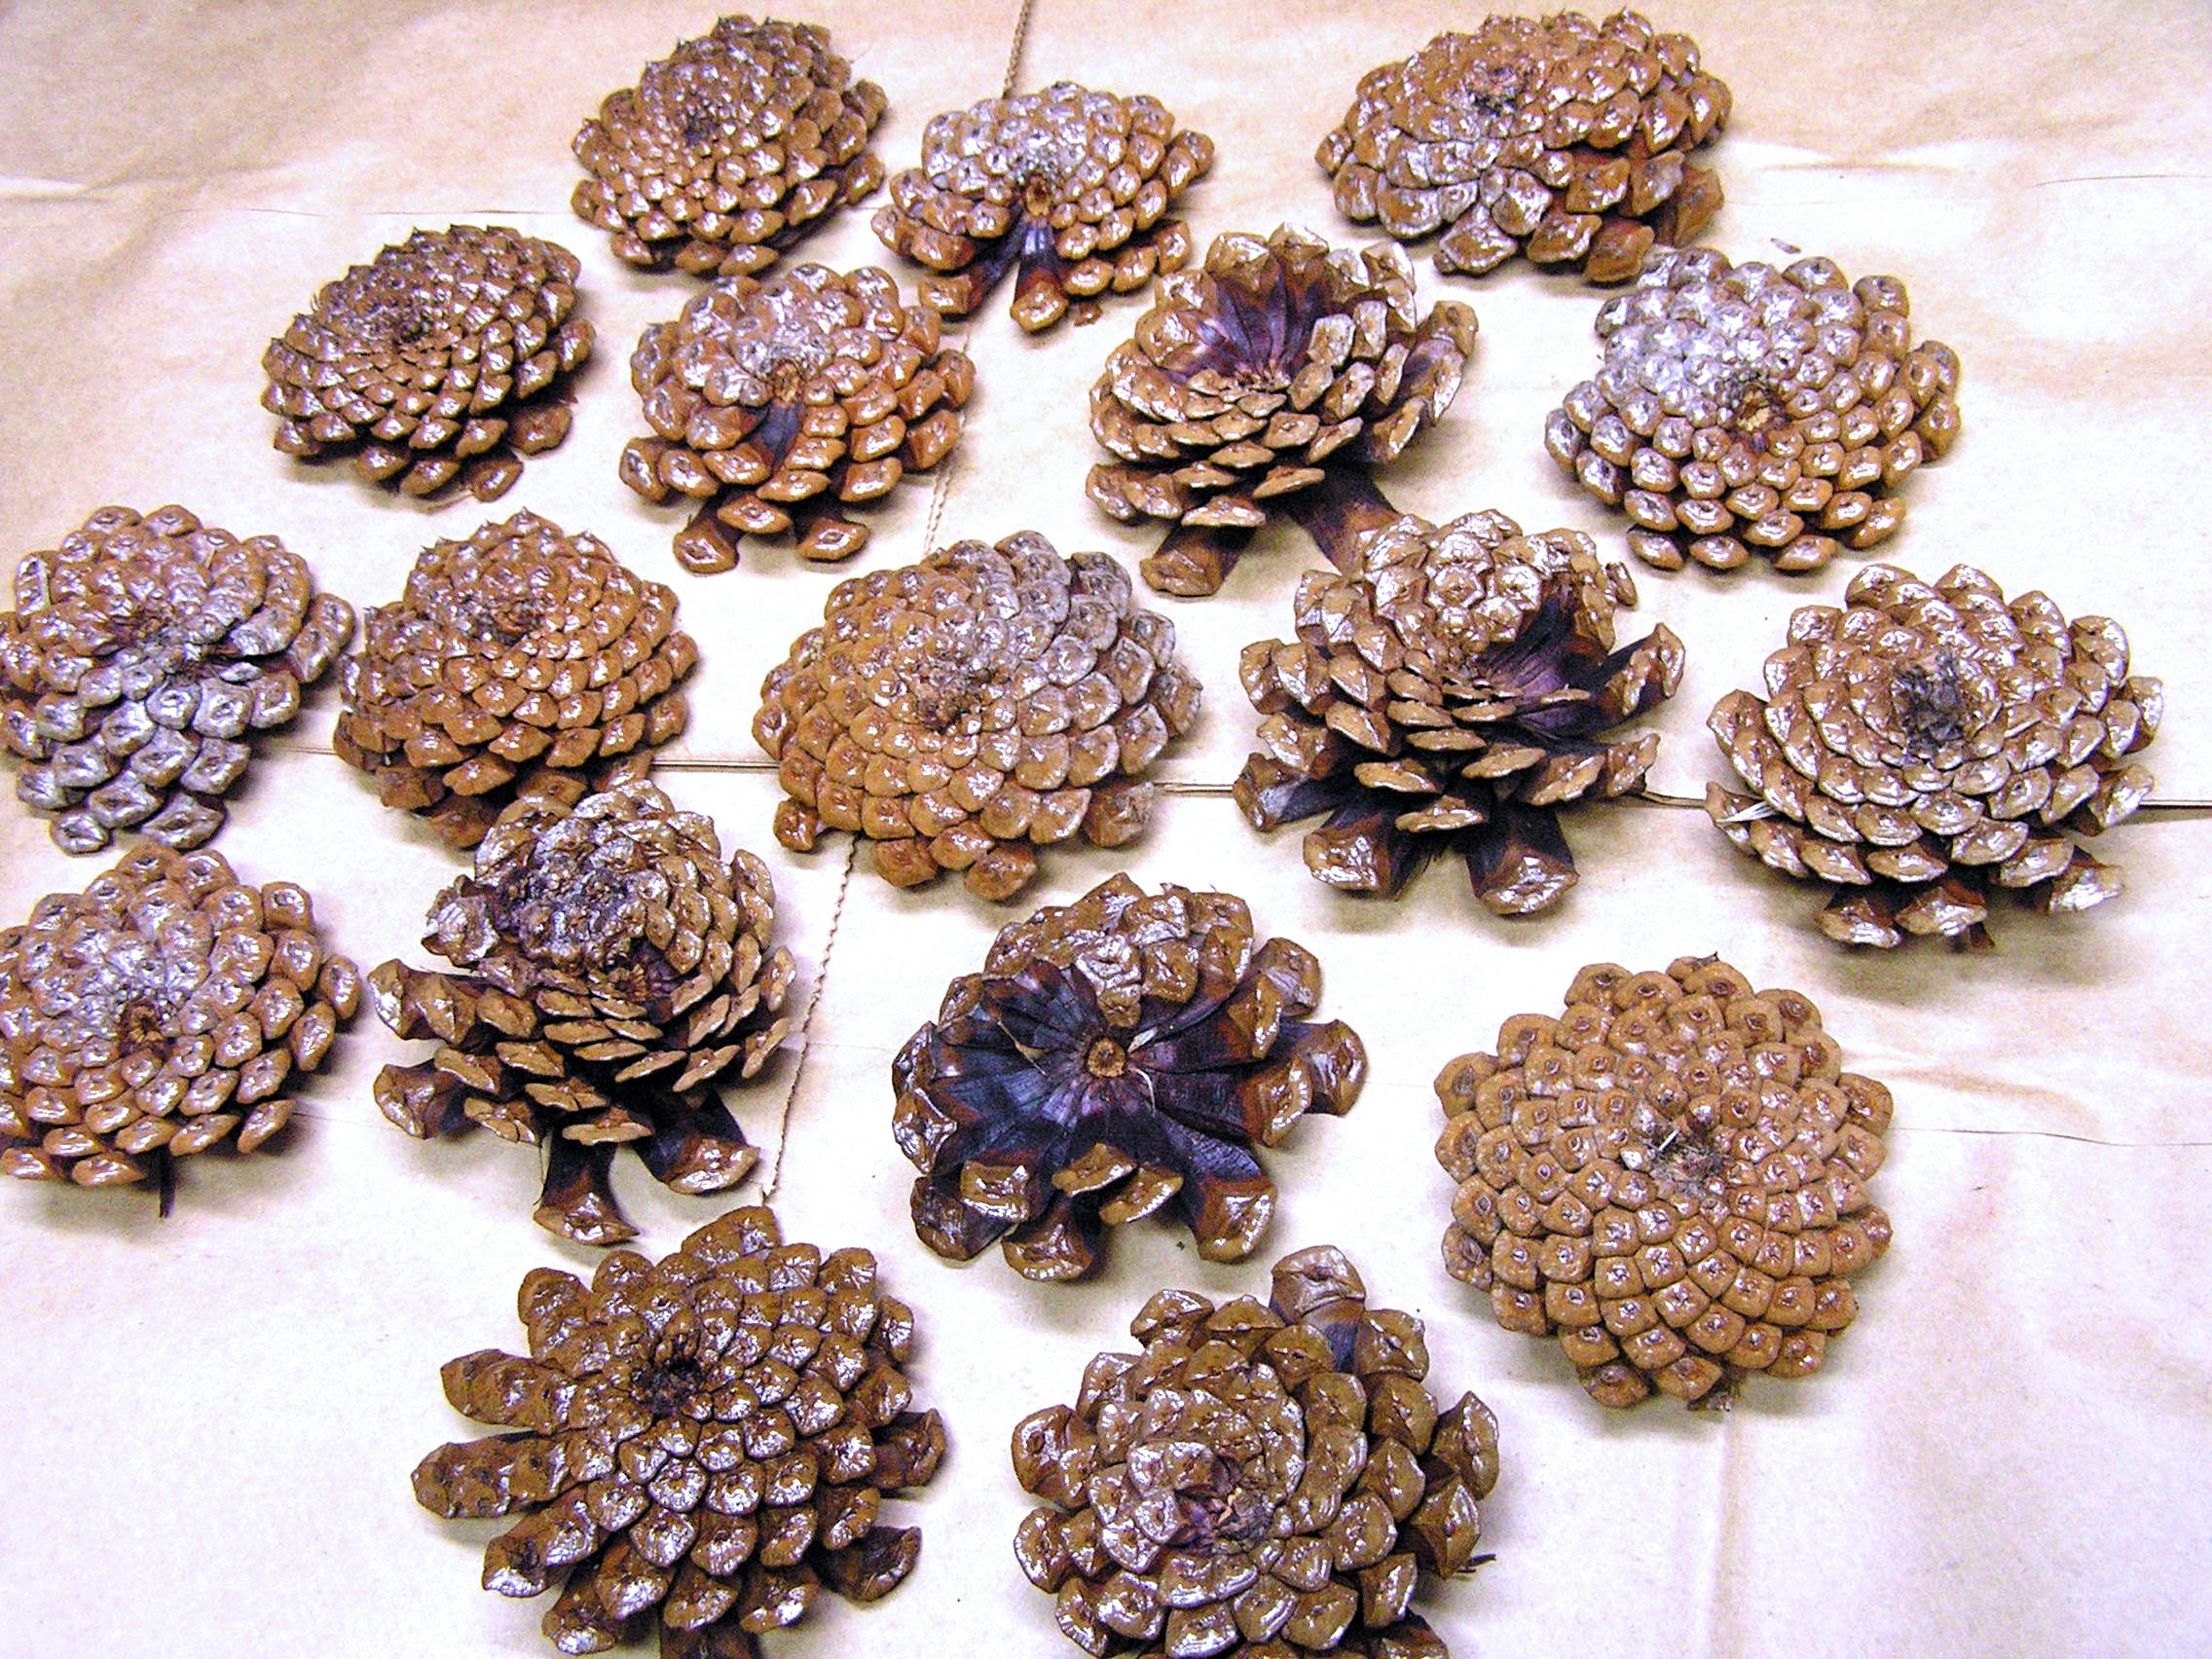 Small pine cones- 100 each order